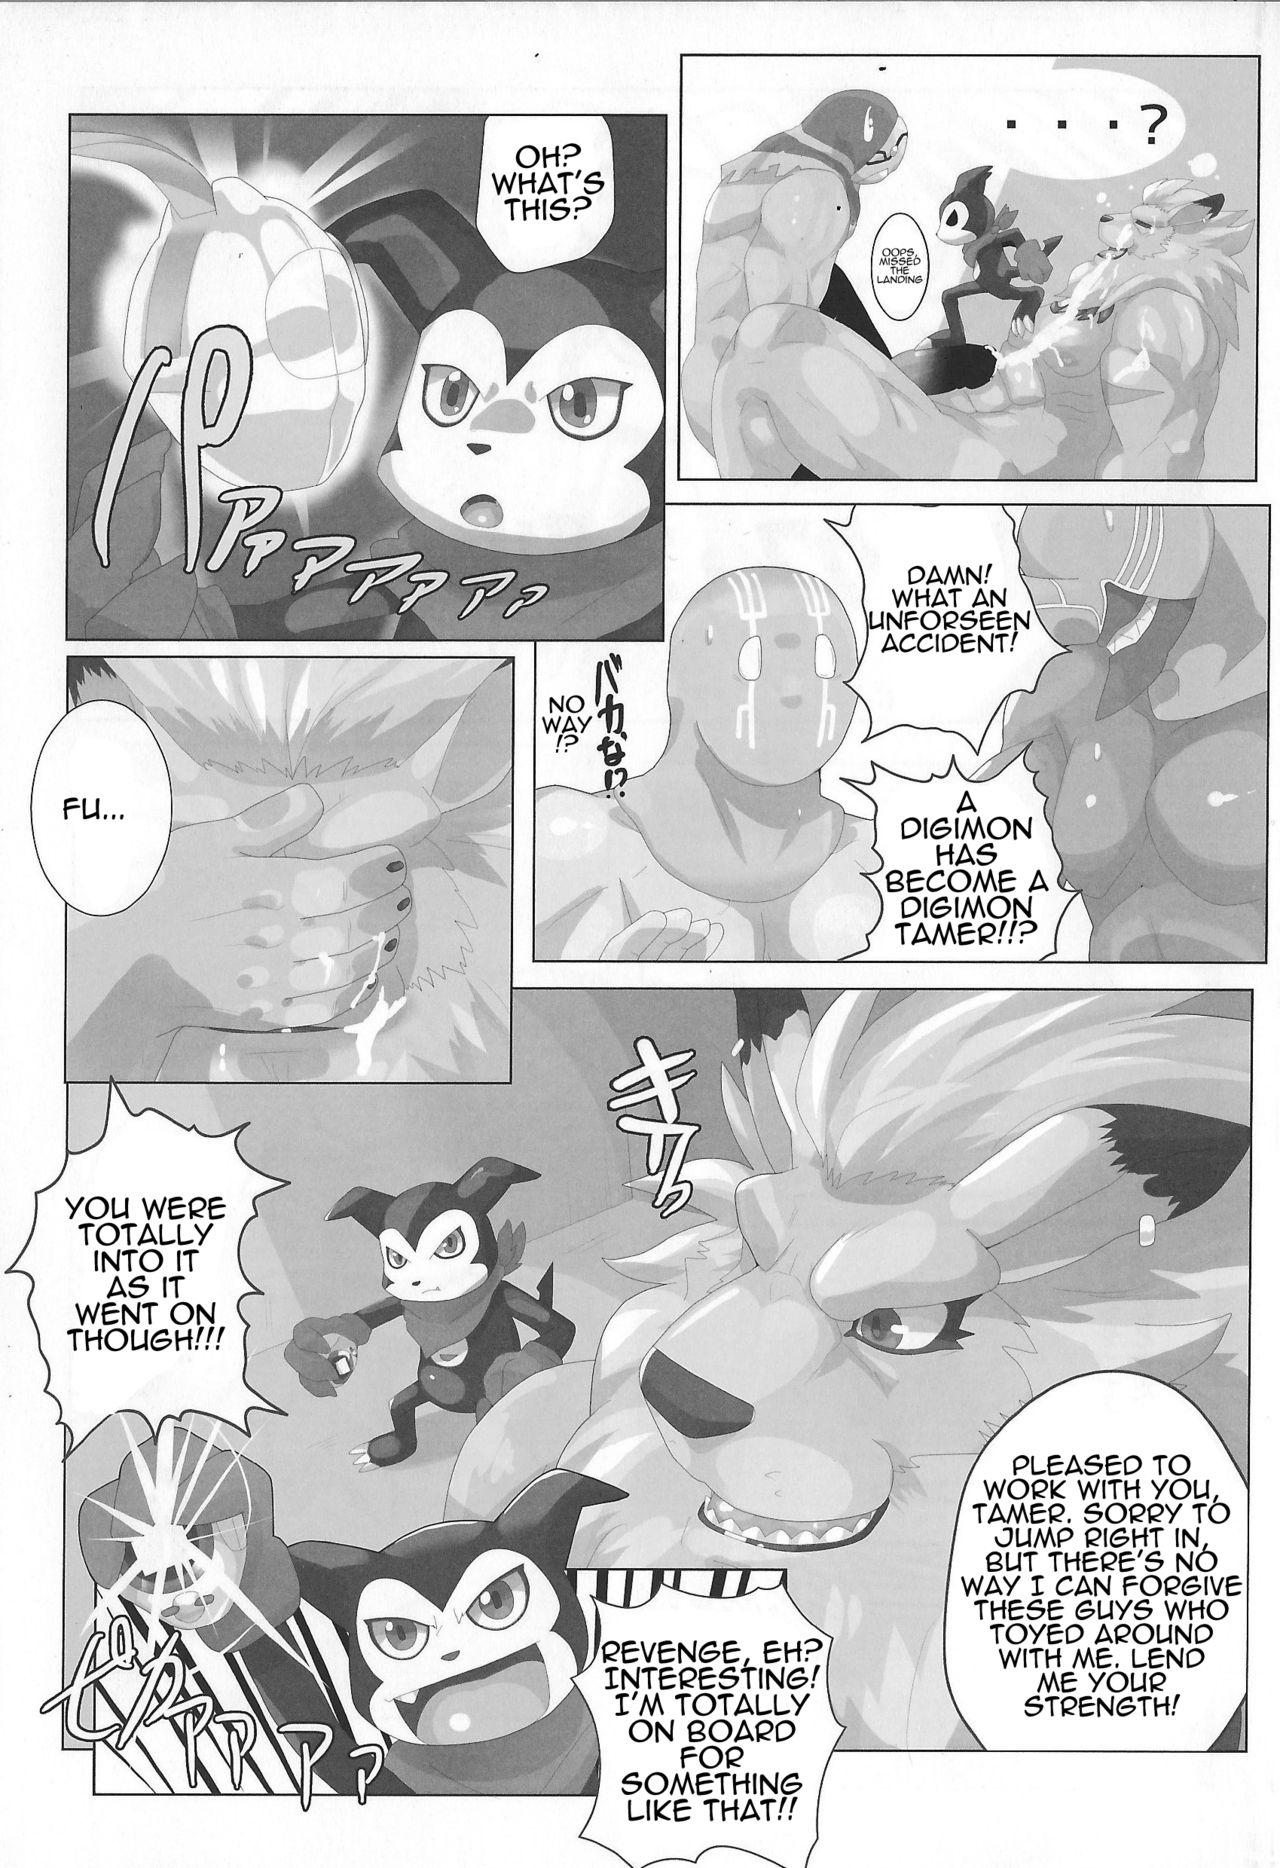 [Debirobu] For the Lion-Man Type Electric Life Form to Overturn Fate - Leomon Doujin [ENG] 20